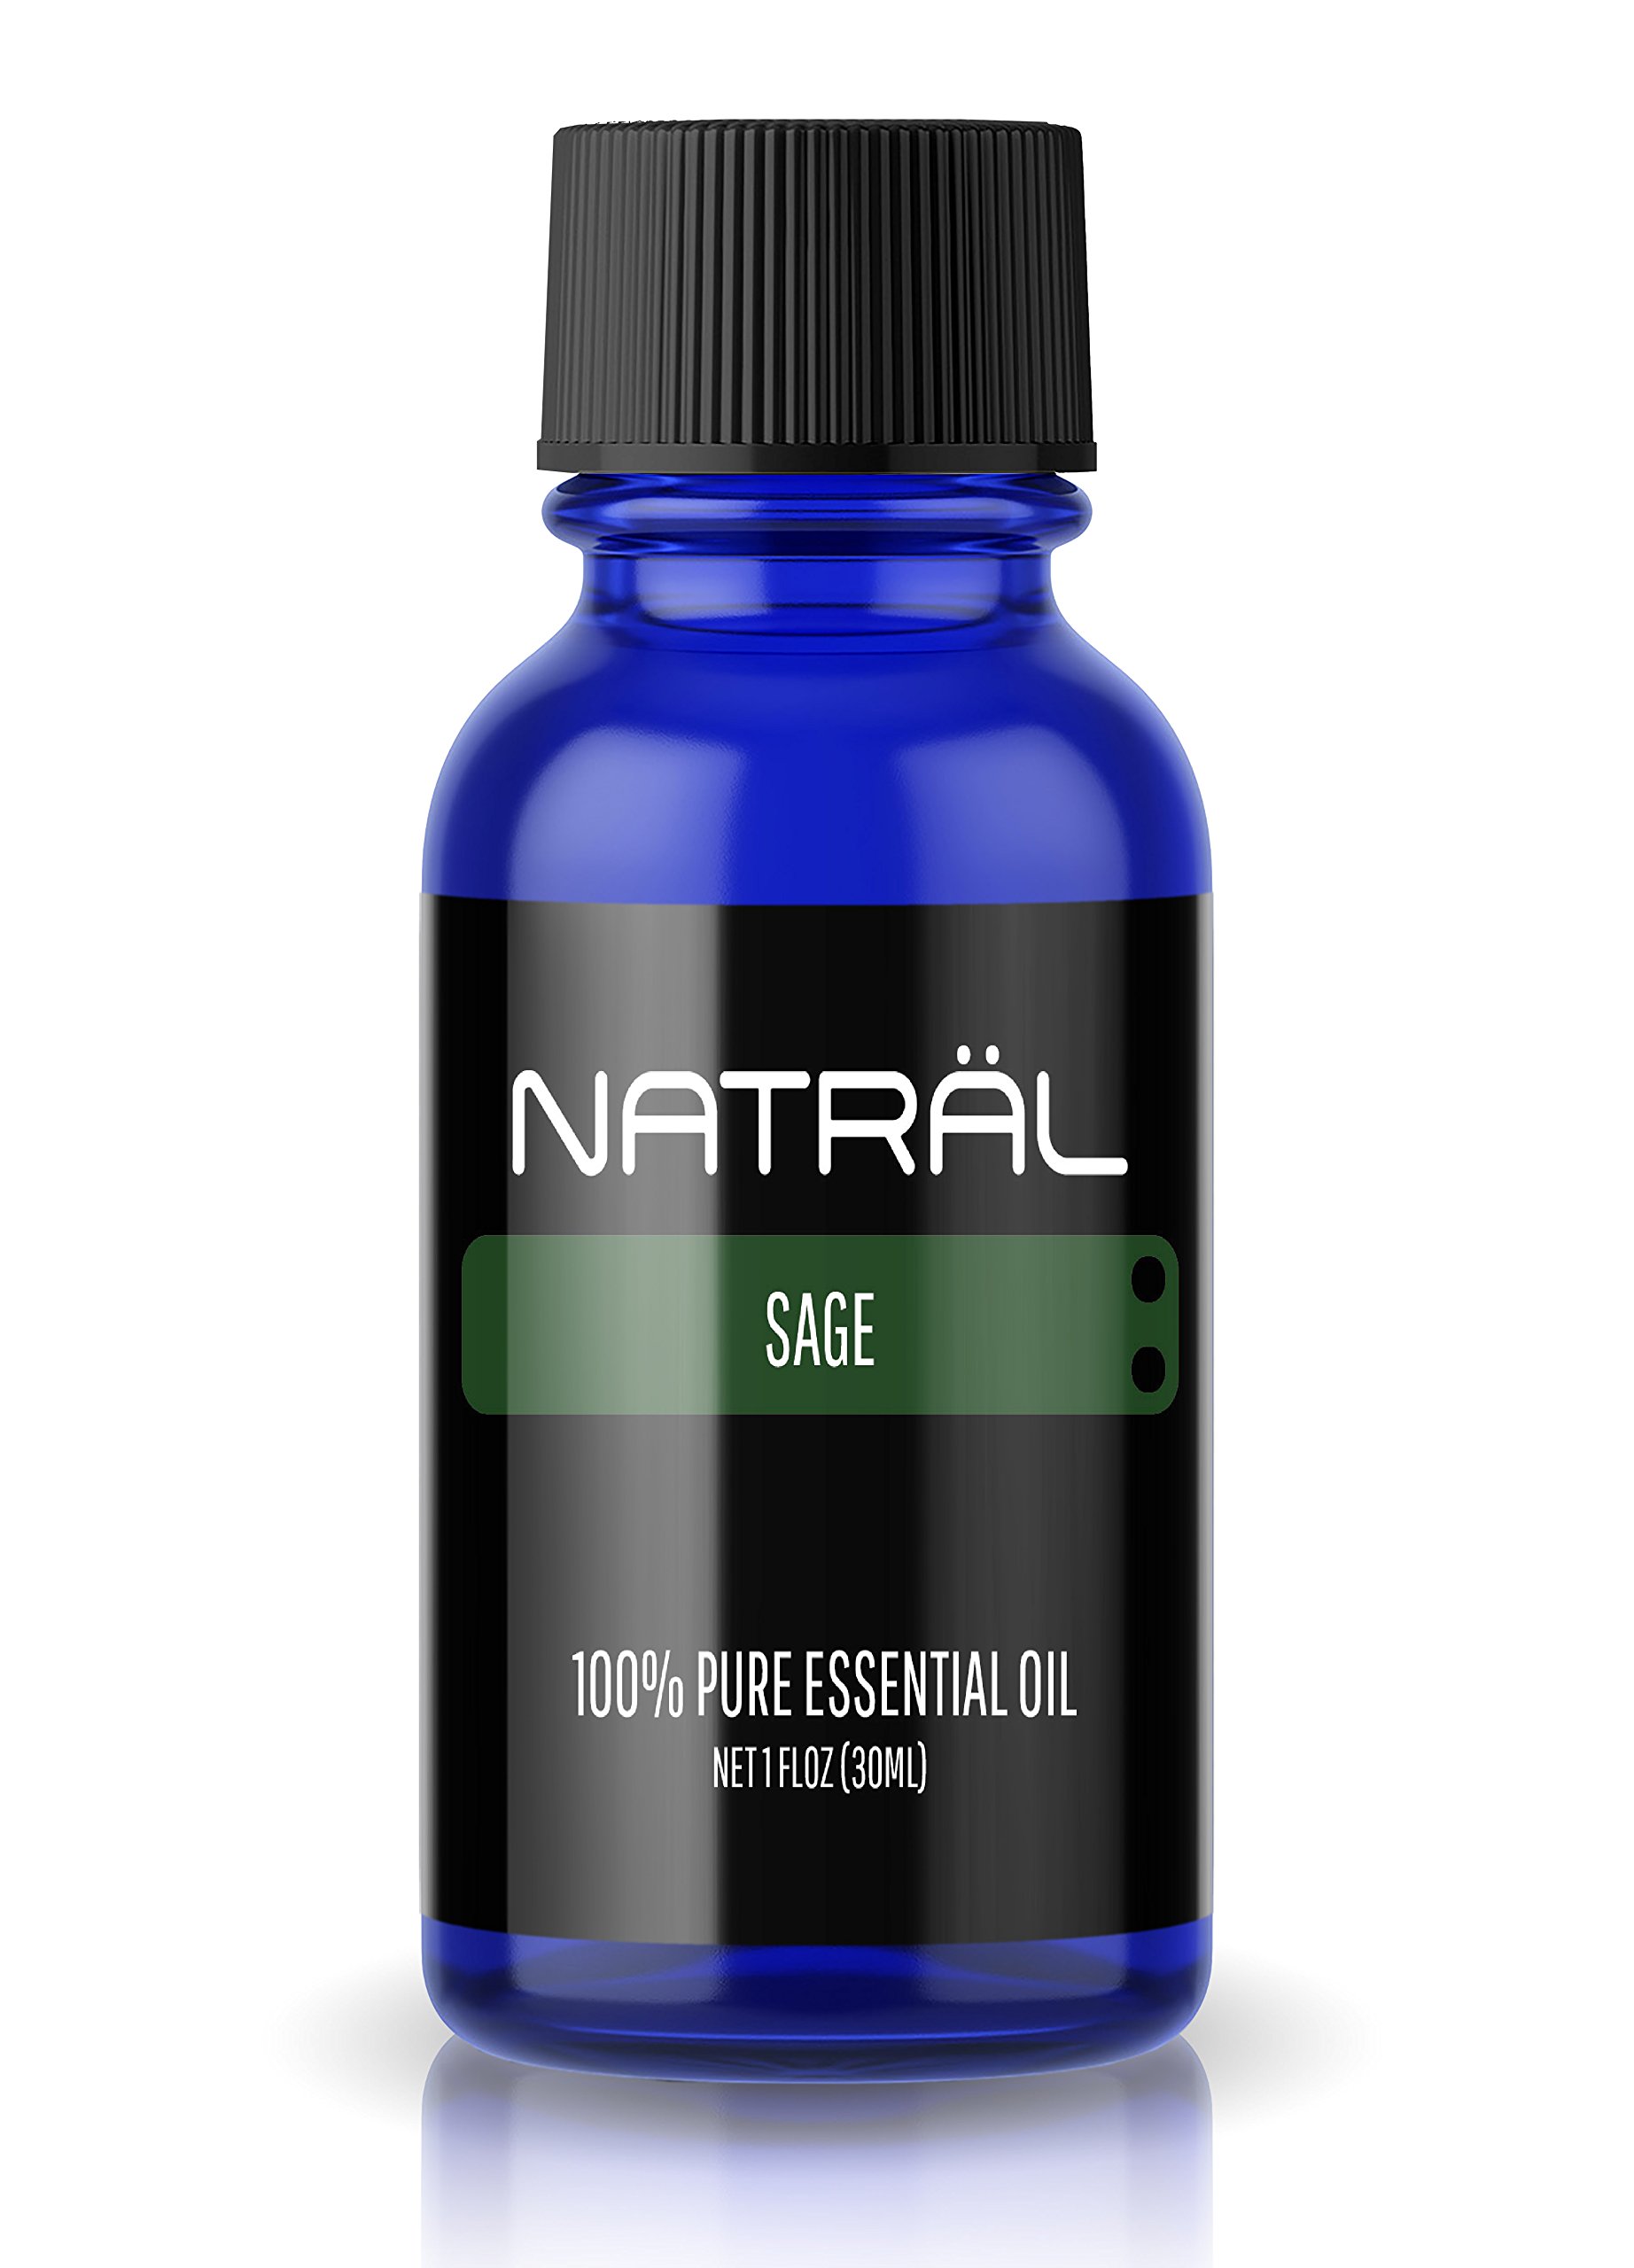 NATRÄL Sage, 100% Pure and Natural Essential Oil, Large 1 Ounce Bottle